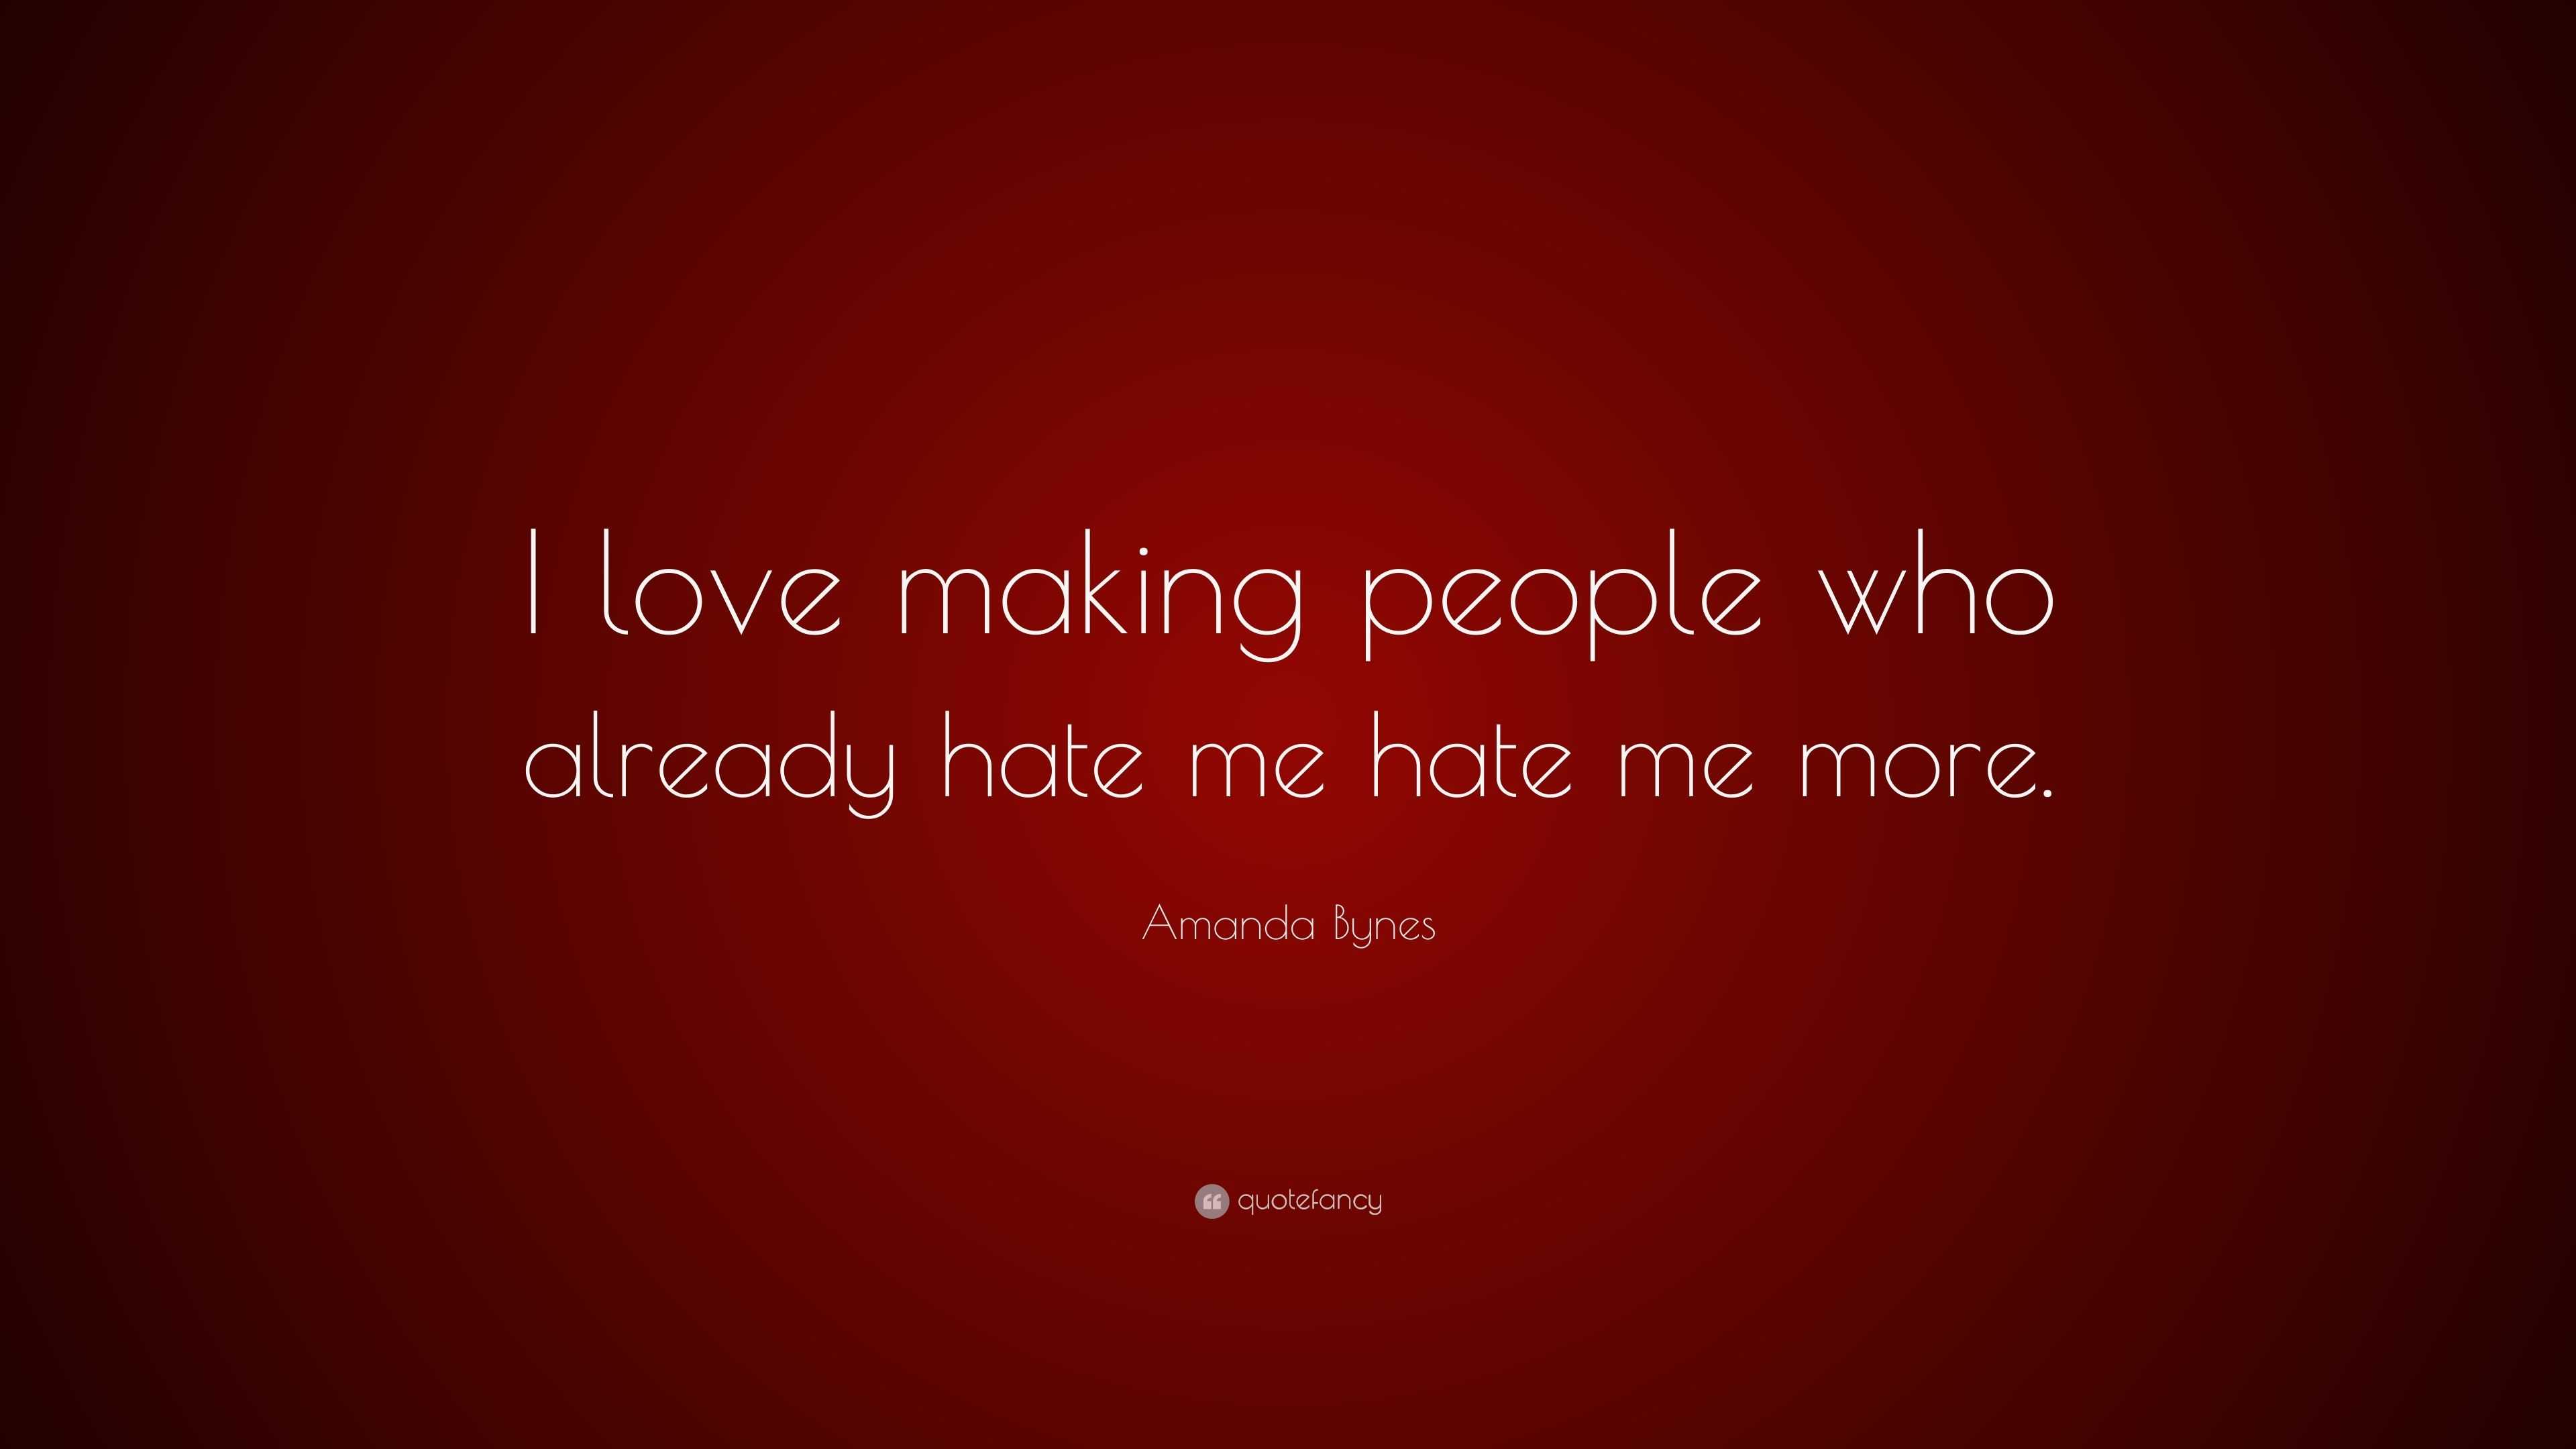 Amanda Bynes Quote “I love making people who already hate me hate me more